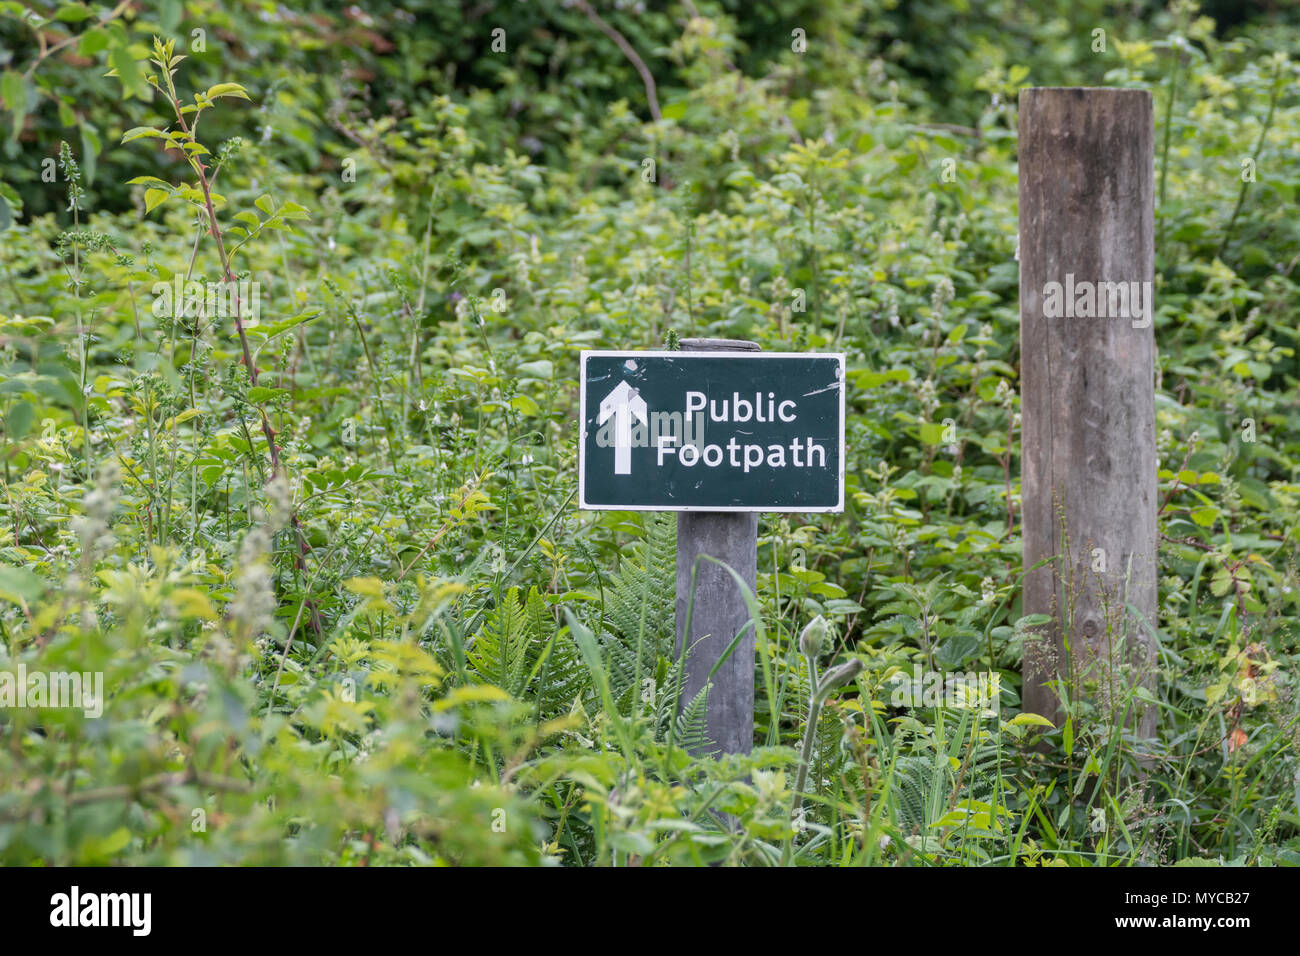 Public footpath sign - the actual footpath overgrown with grass and weeds. Stay on the right path parody, UK walking signpost, weeds growing on path. Stock Photo